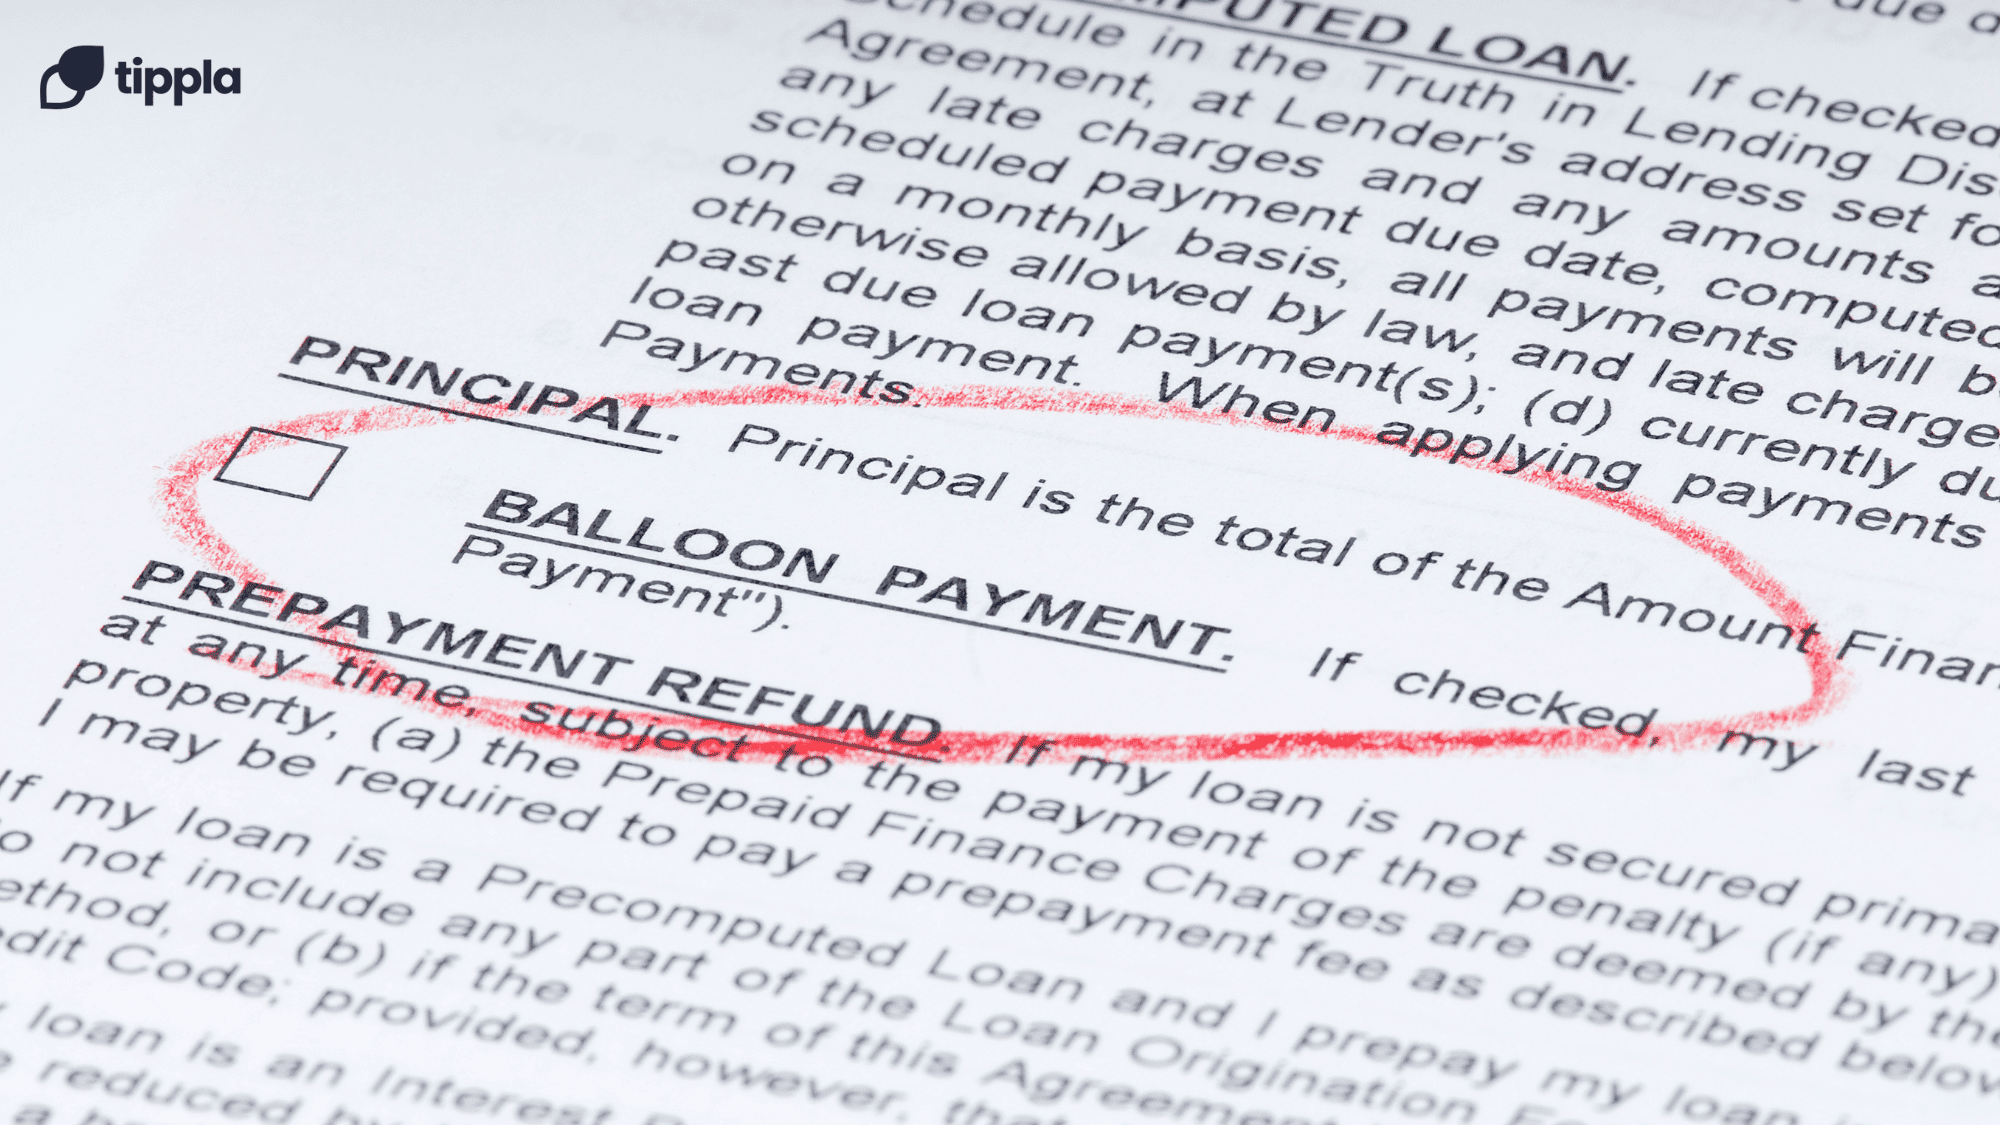 Balloon Payments in Loans